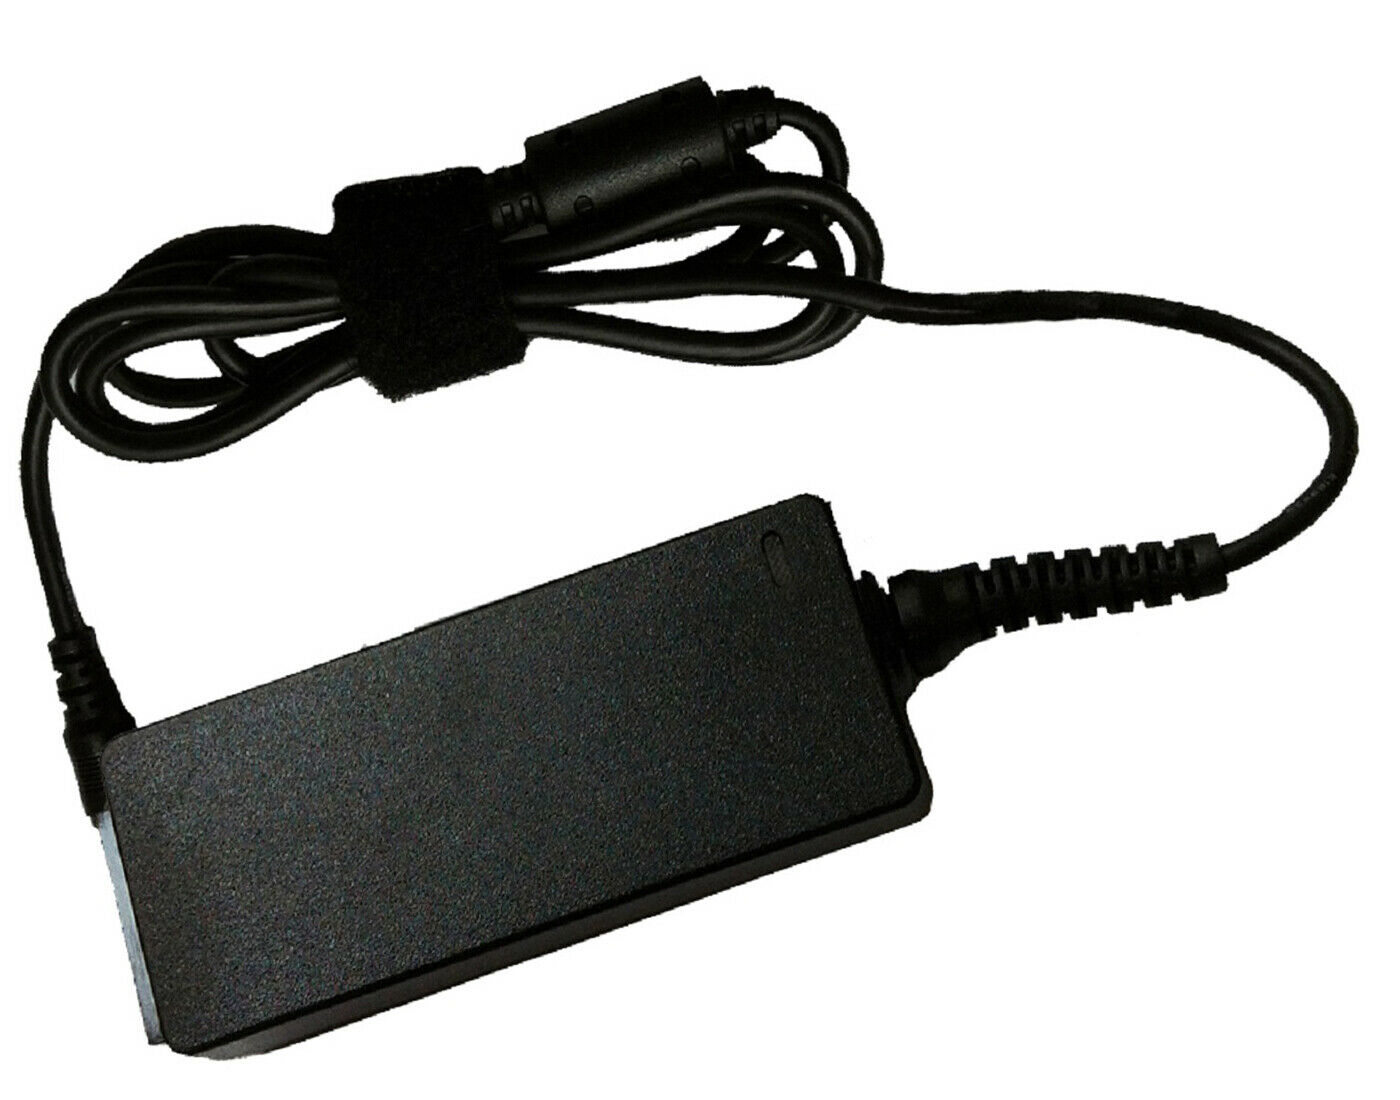 *Brand NEW*Ault Inc 15V AC Adapter For Stryker REF 240-030-921 MW116KA1500F52 240030921 POWER Supply